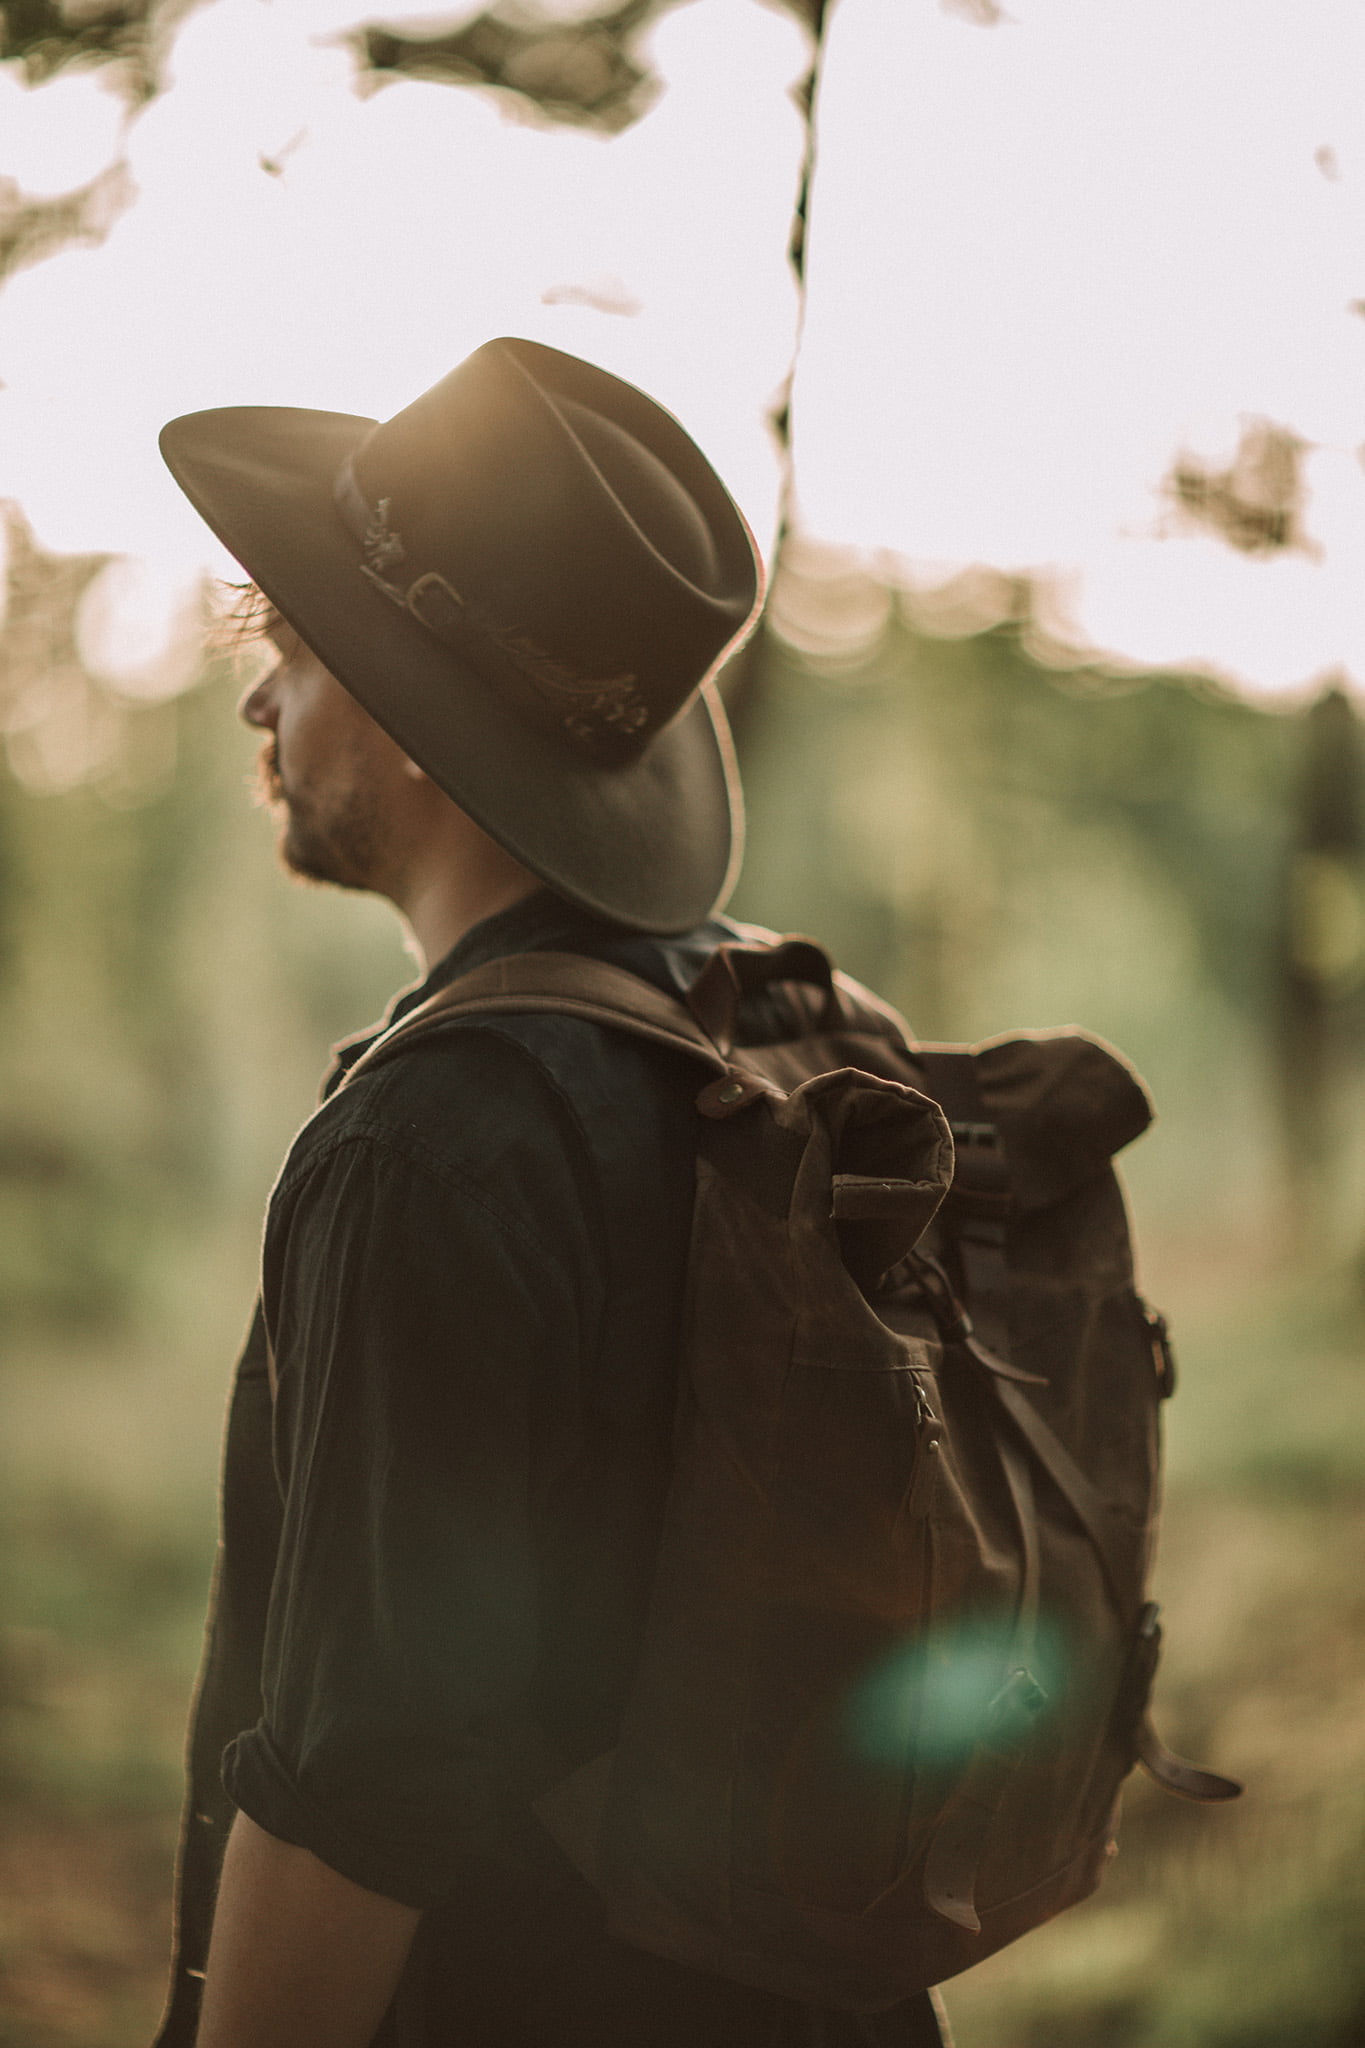 Waxed Cotton Canvas and Leather Backpack Rucksack - Menswear Denim Rugged Style Outfit Royden Park, Wirral, Merseyside - The Harlington in Sandstone by Oldfield - Photo by Samuel Mills